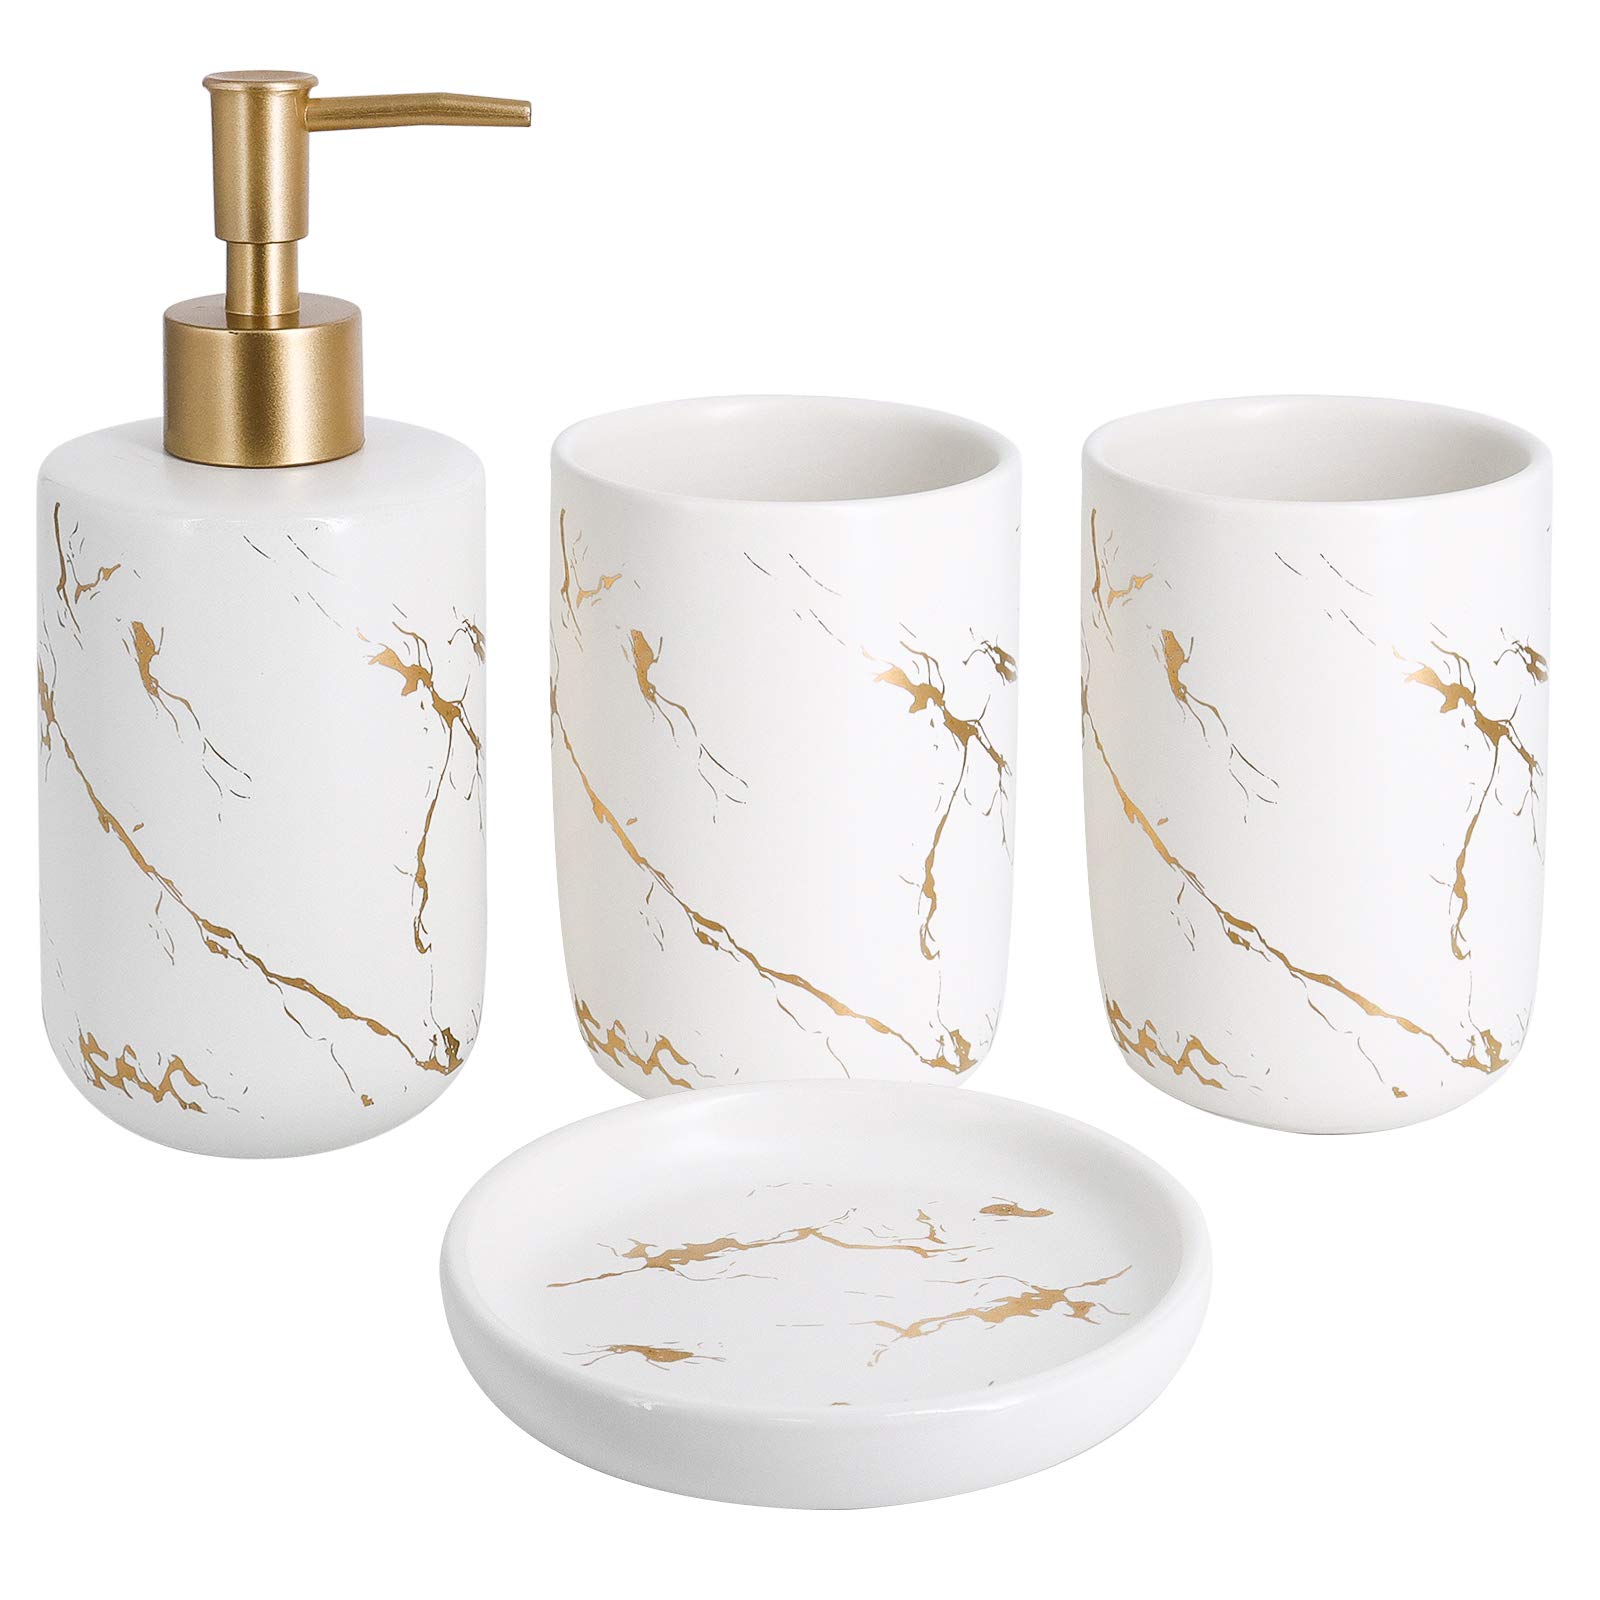 Buy Banwari Crafts Hand Painted Ceramic Bathroom Accessories Set of 3 Pcs -  Liquid Soap Dispenser, Soap Dish and Toothbrush Holder for Bathroom Décor  and Home Gift Set BS103 Online at Best